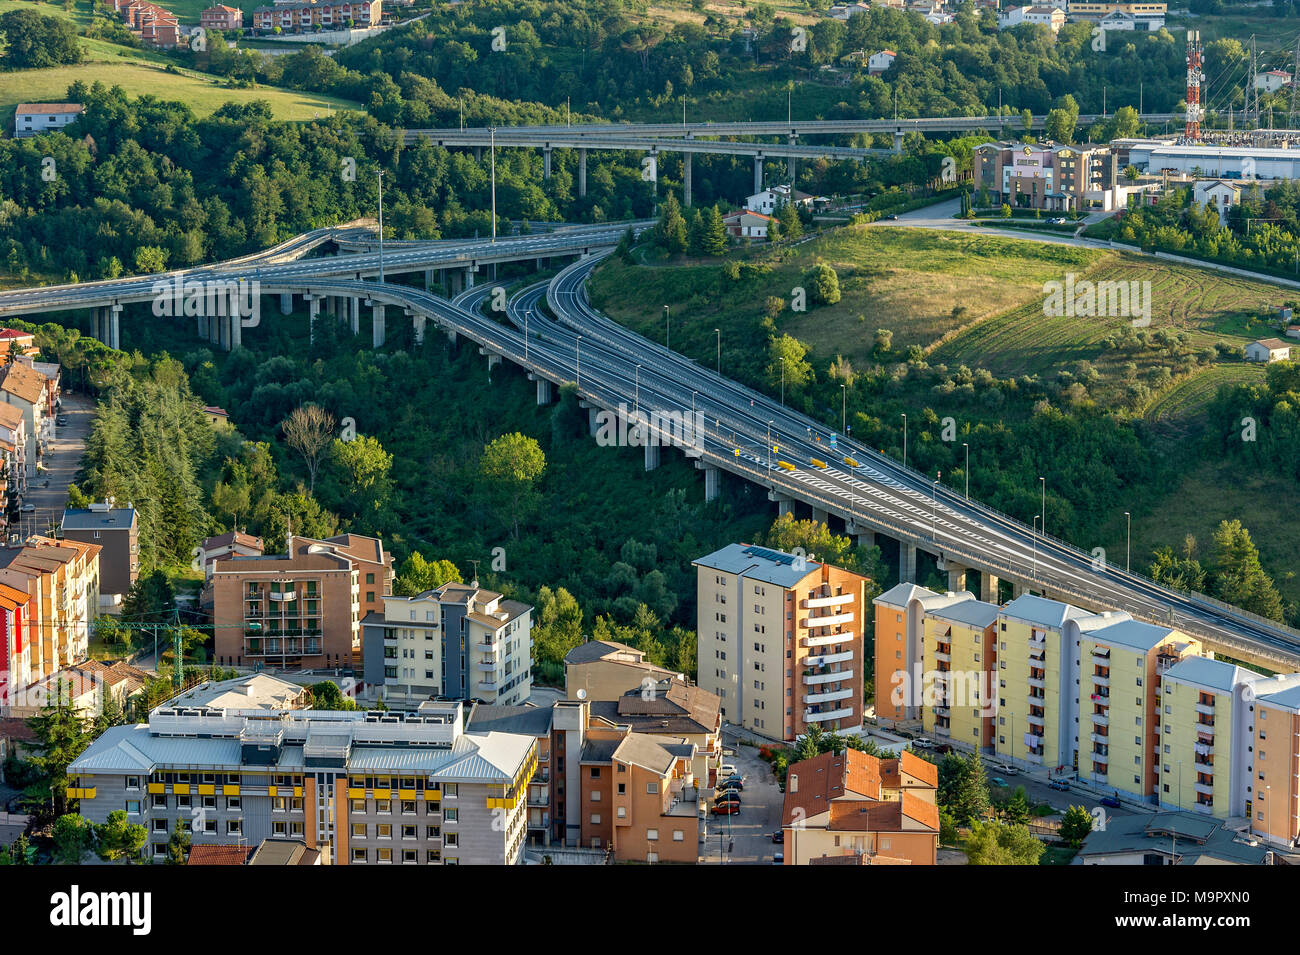 View from Castello Monforte over apartment blocks and motorway junction, Campobasso, Molise, Italy Stock Photo